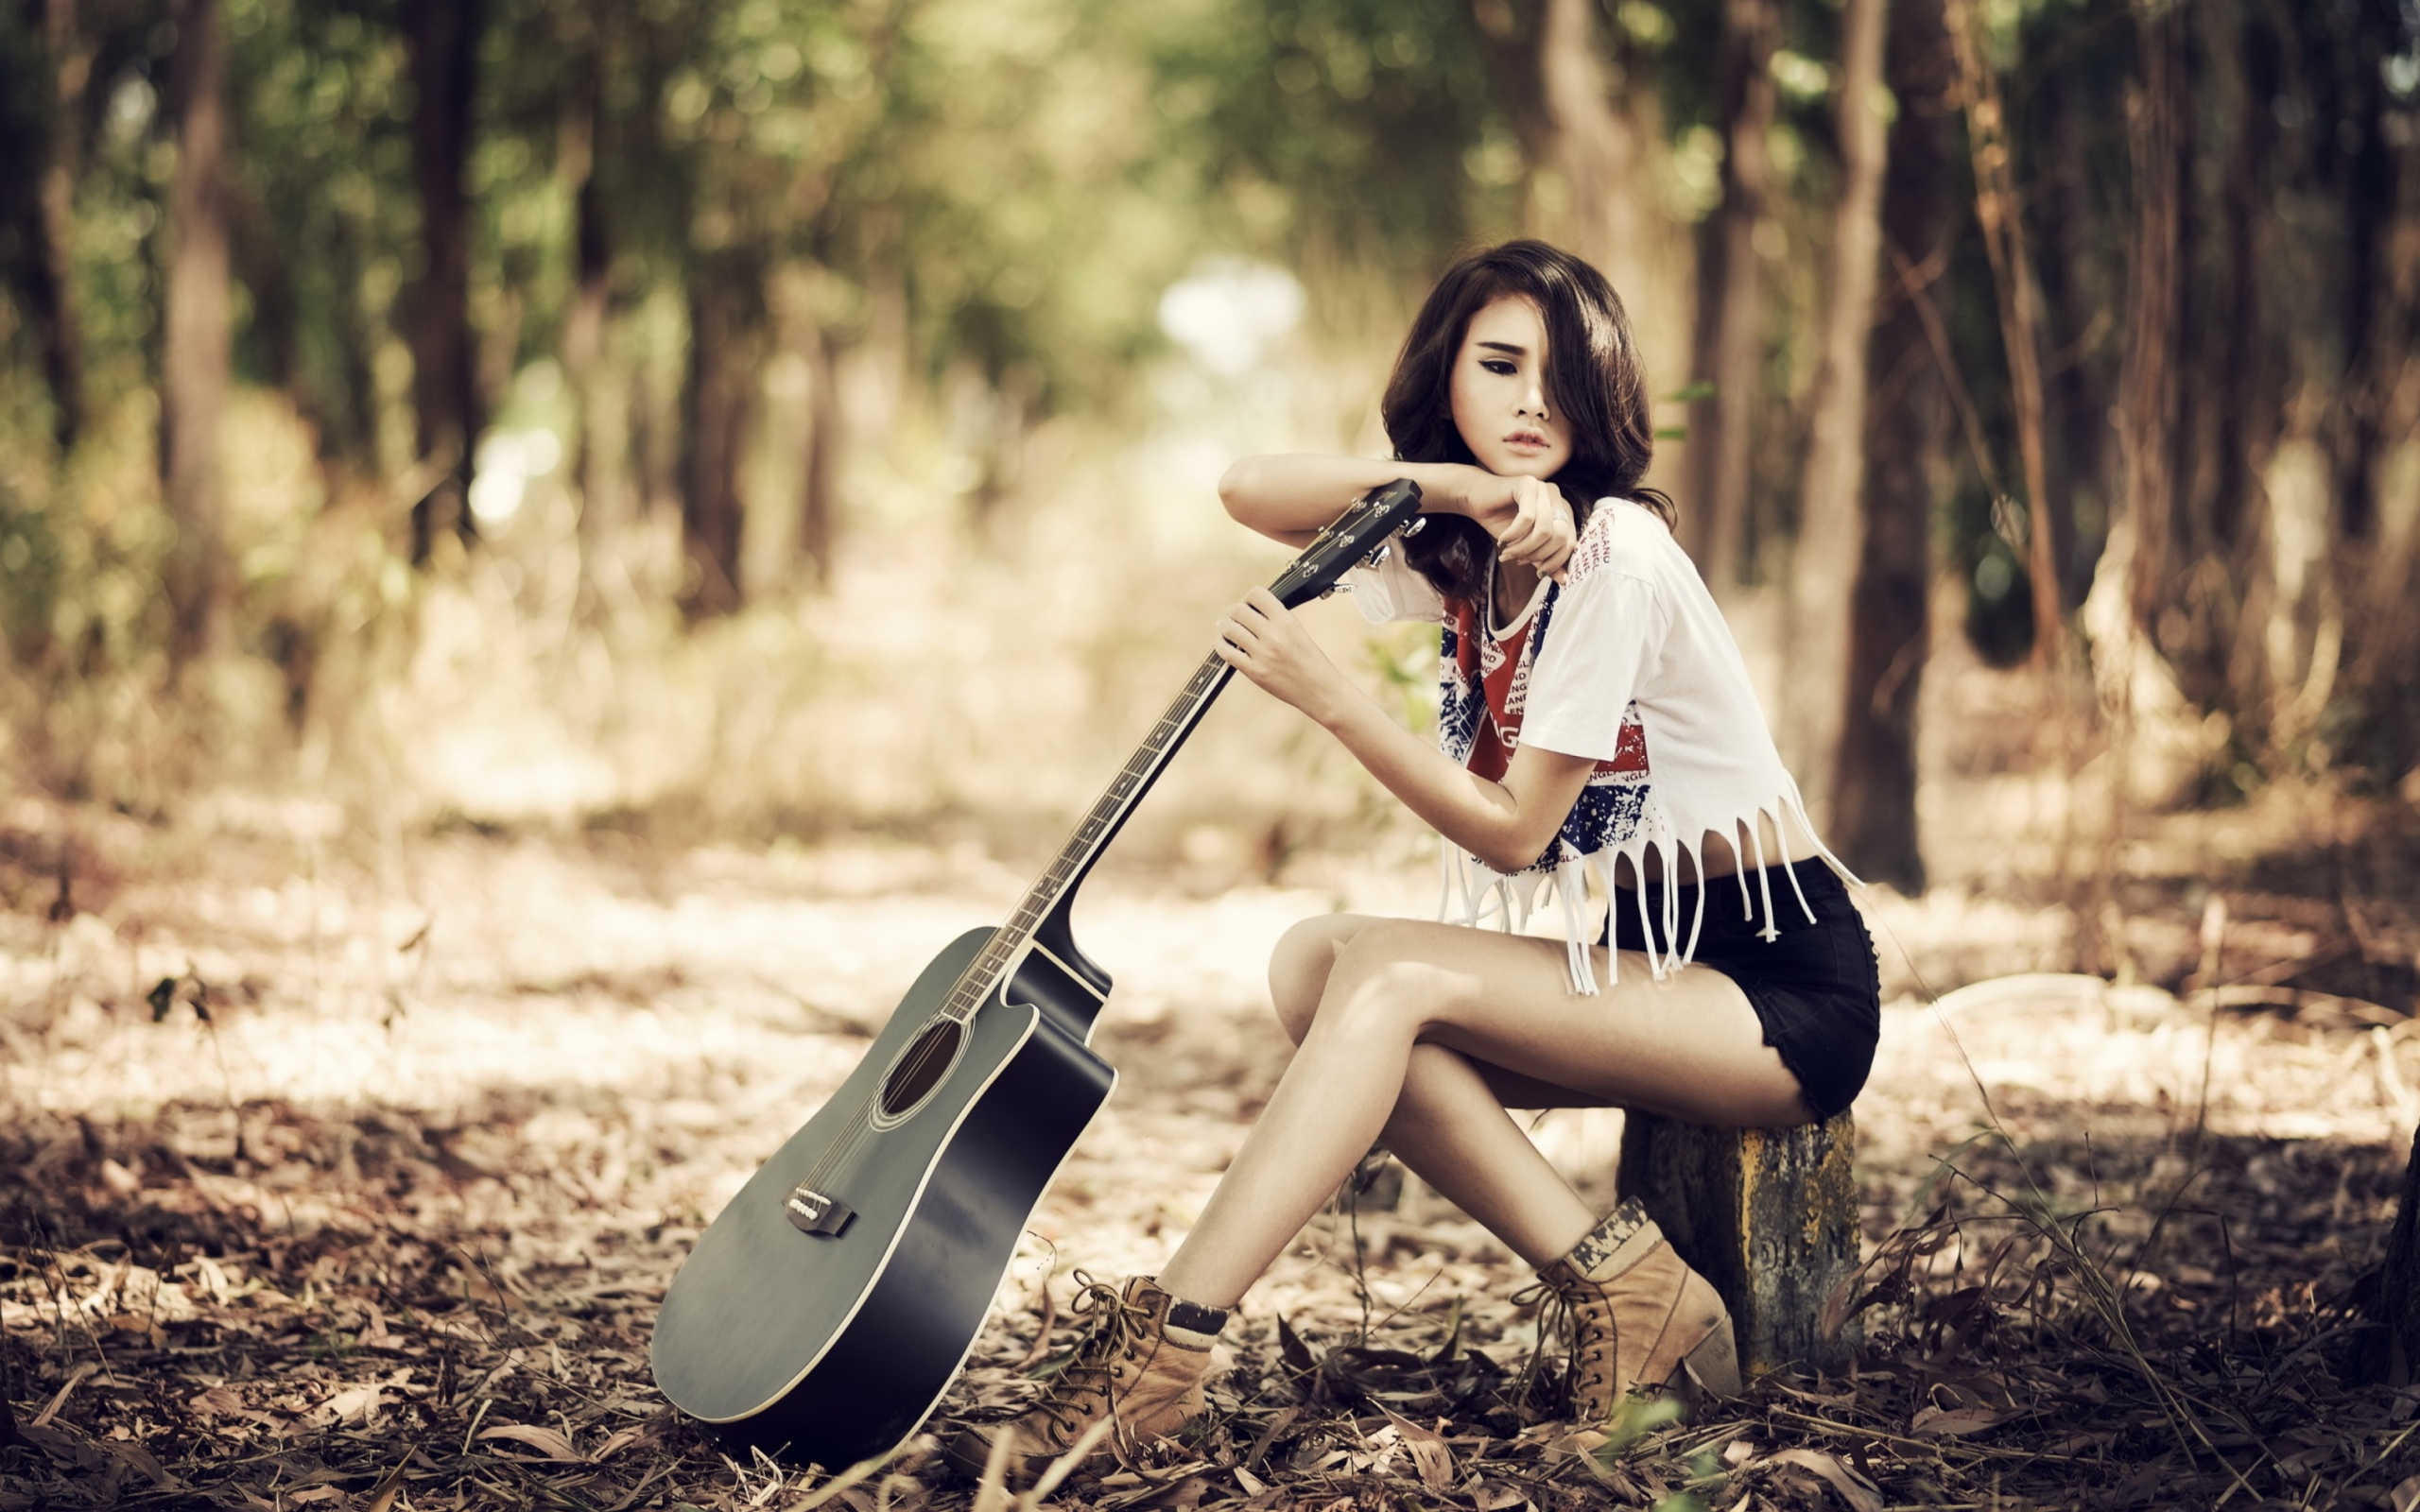 Pretty Brunette Model With Guitar At Meadow screenshot #1 2560x1600